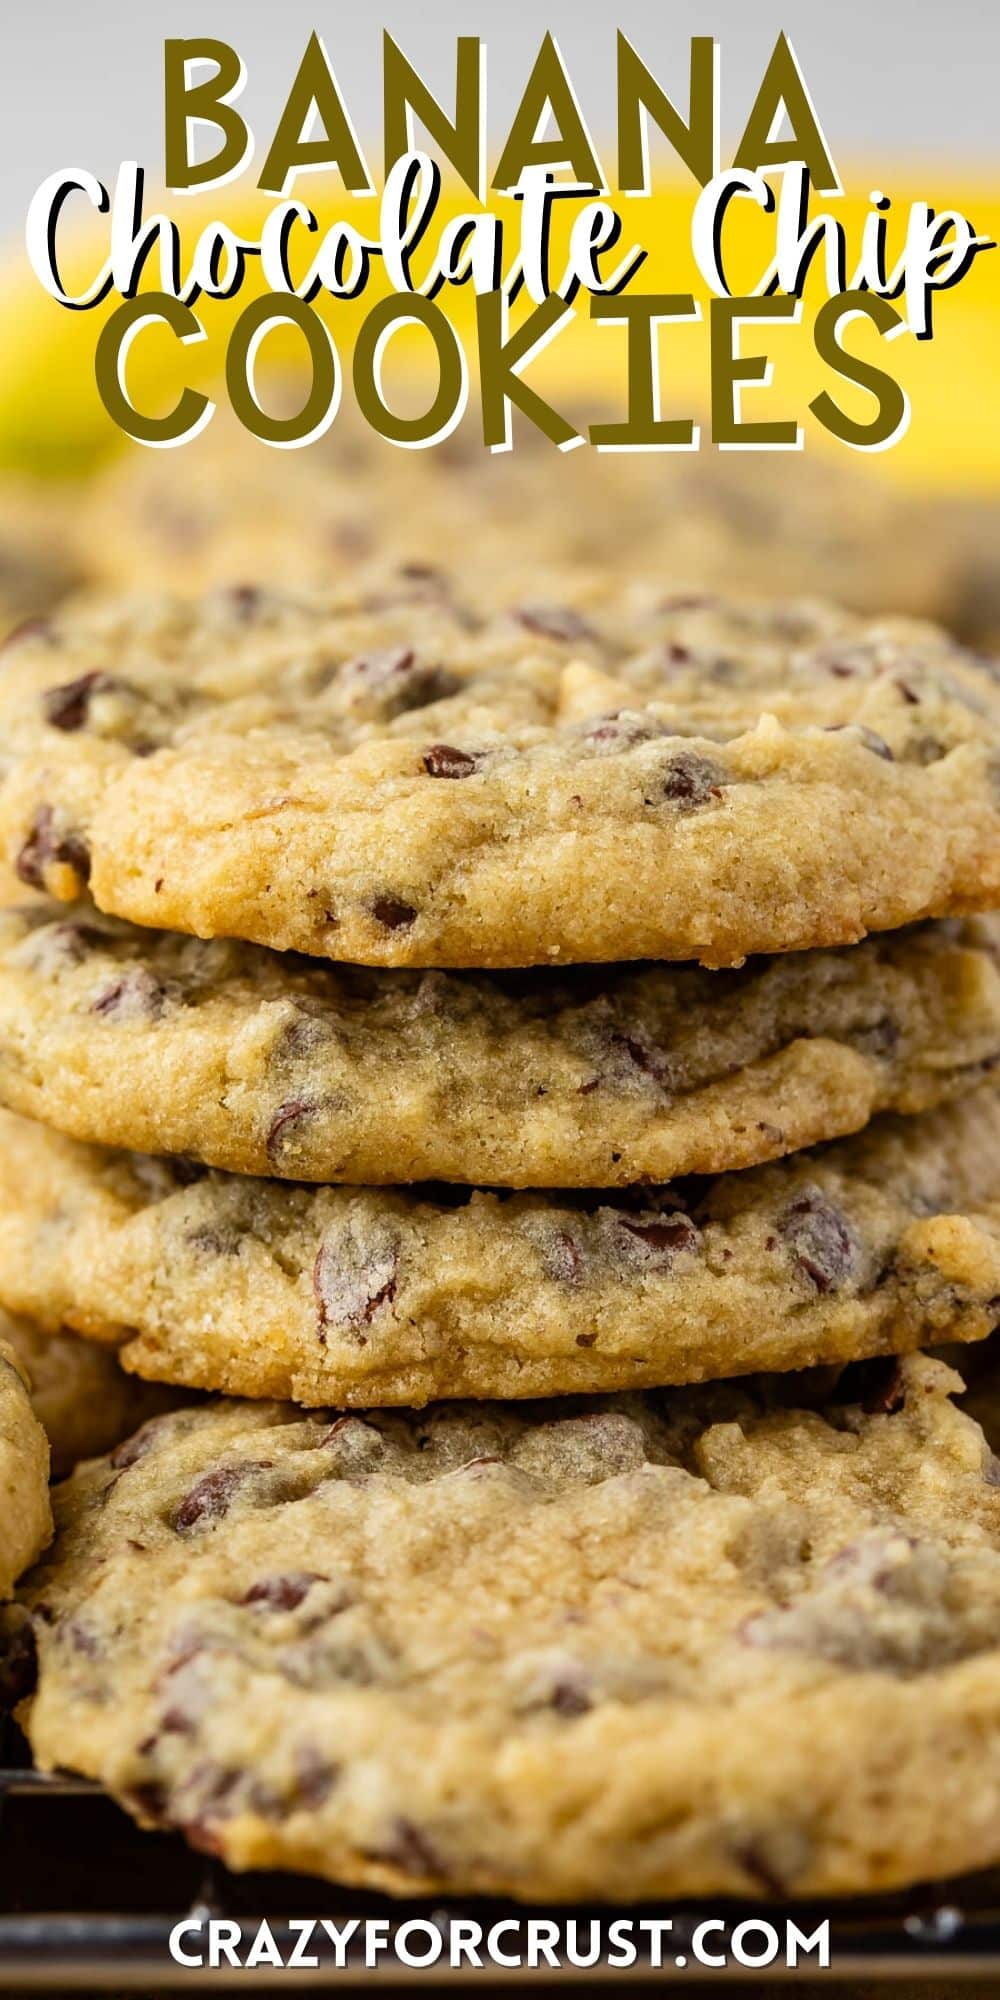 stacked cookies with chocolate chips baked in and bananas in the back with words on the image.